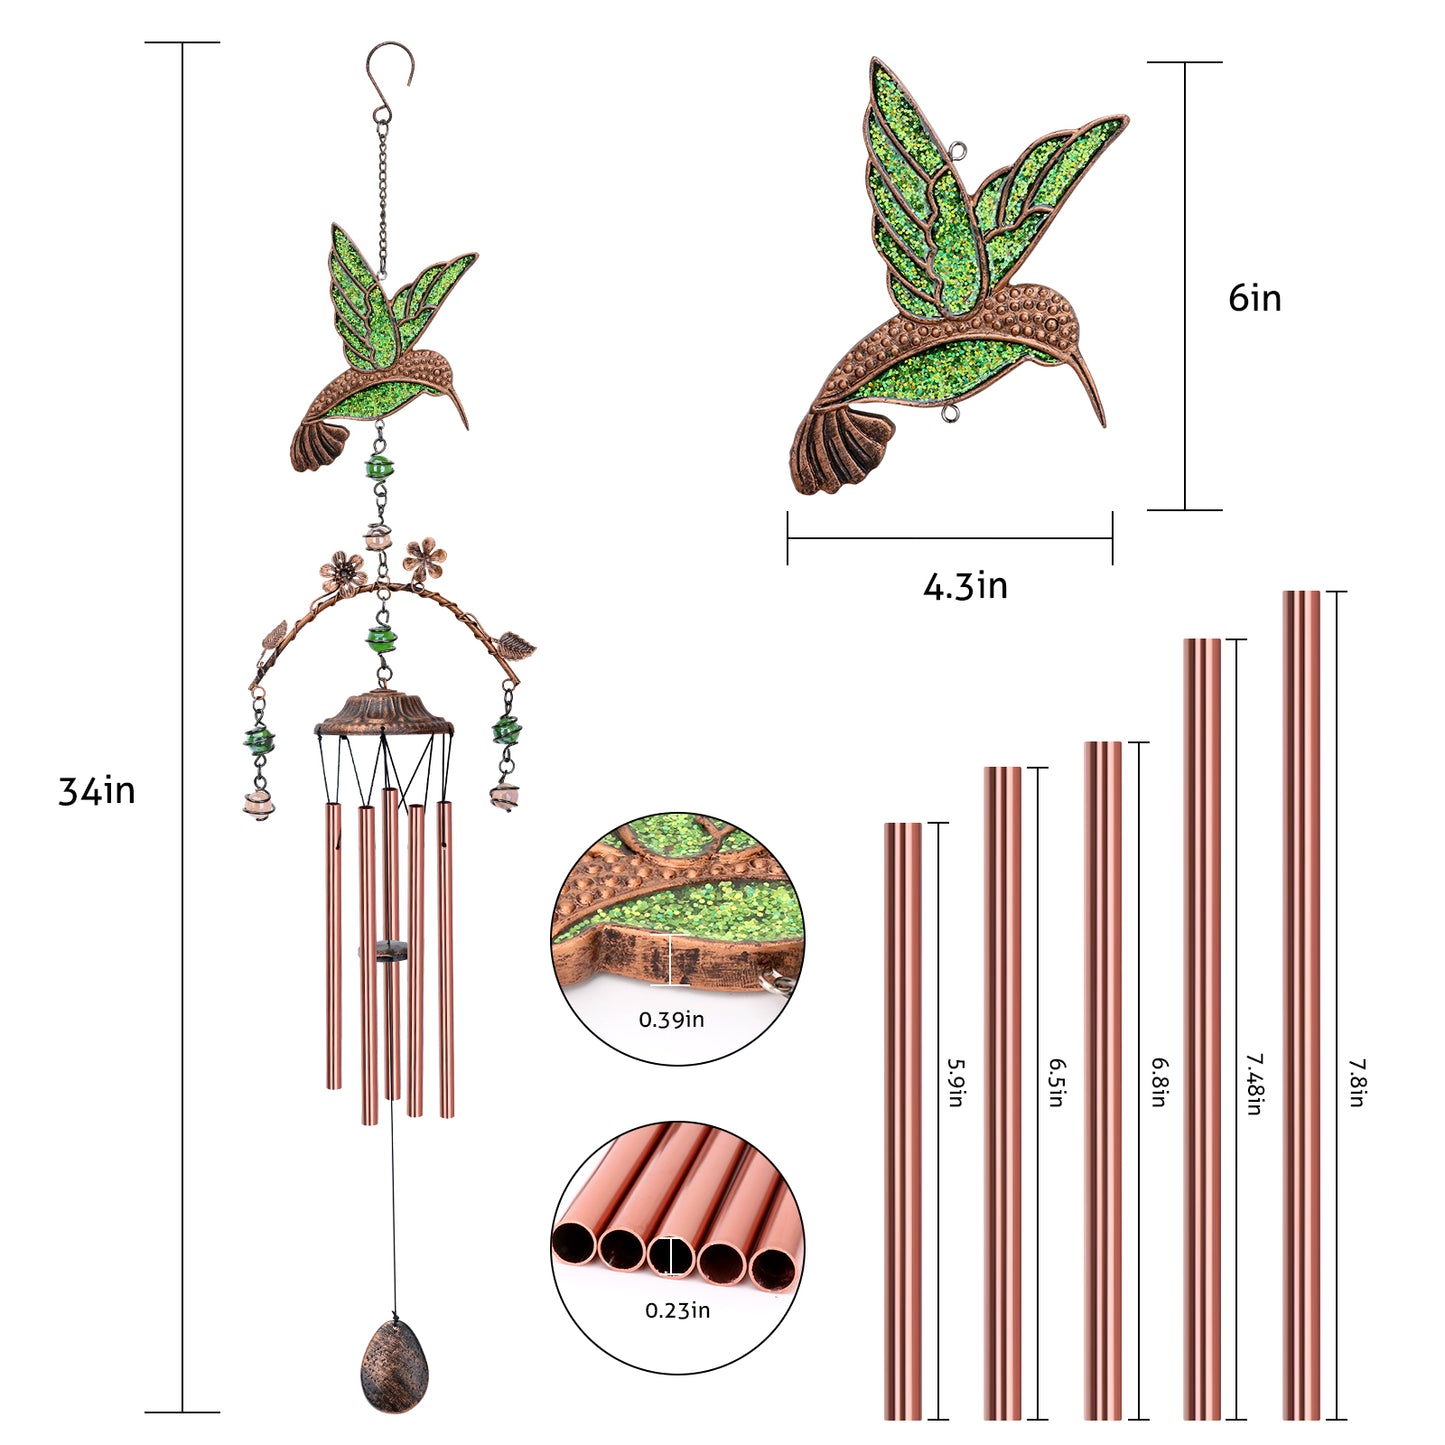 Wind Chimes - Hummingbird Wind Chimes for Outside Deep Tone 34 inches 5 Aluminum Tubes, Thanksgiving, Christmas, Birthday Gifts for Mom, Grandma, Daughter, Decoration for Home, Garden, Patio, Backyard